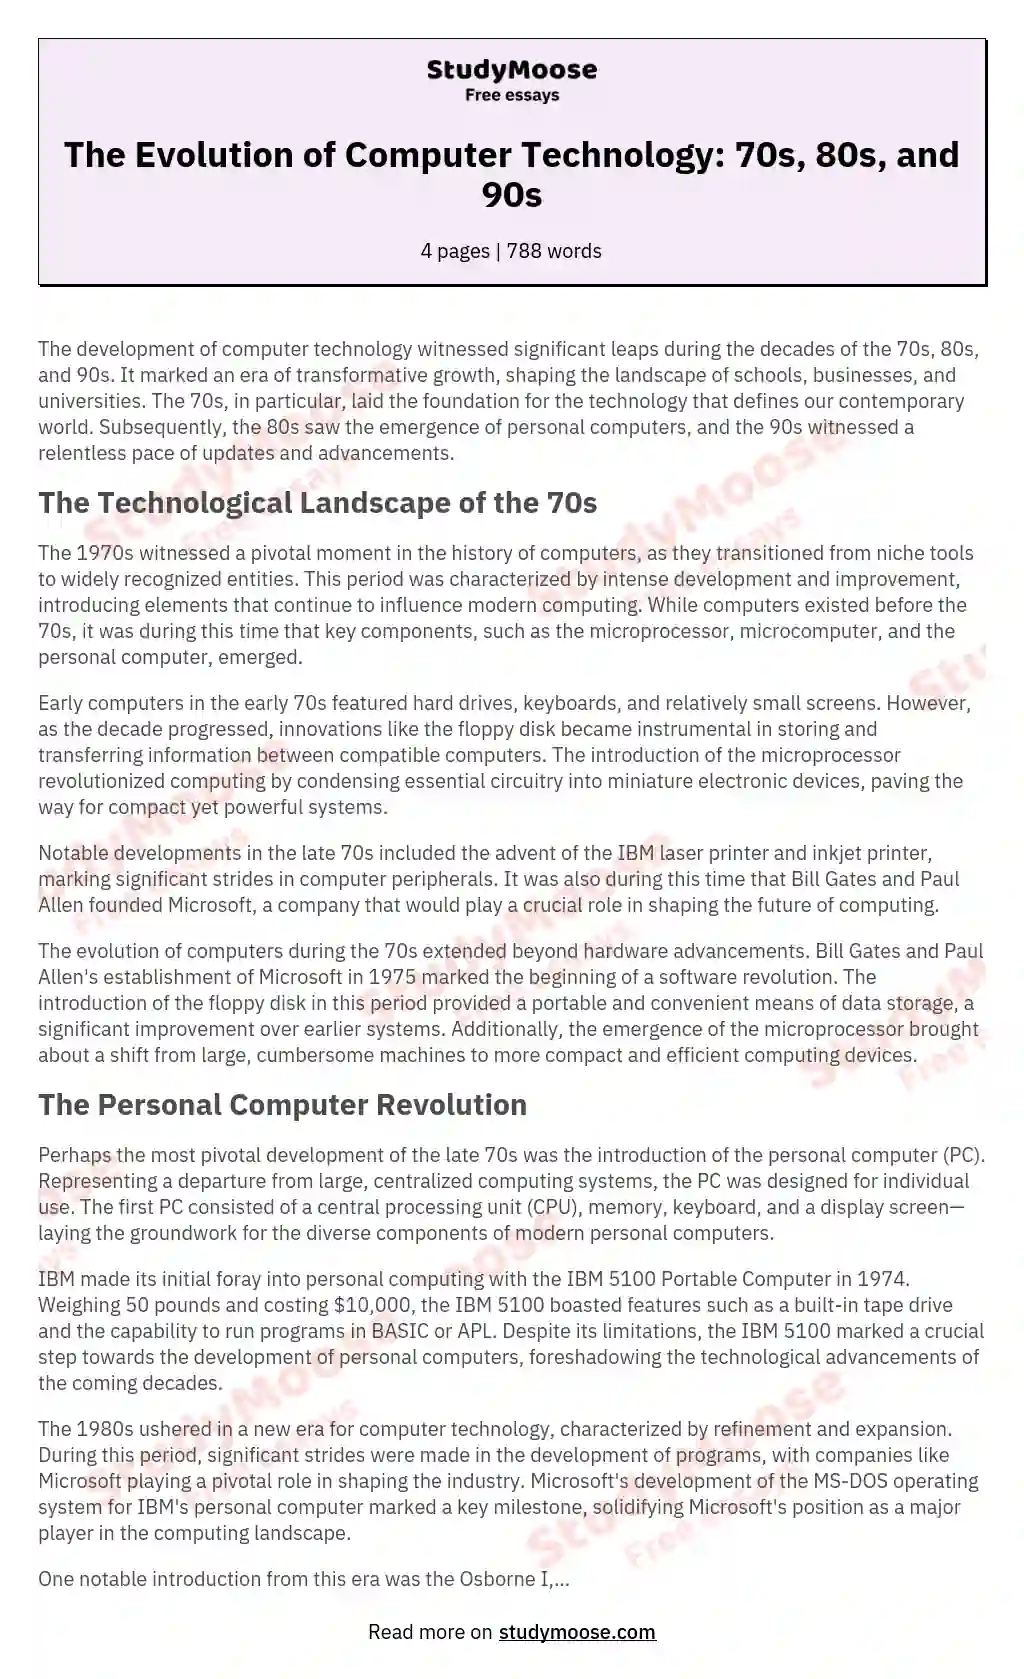 The Evolution of Computer Technology: 70s, 80s, and 90s essay